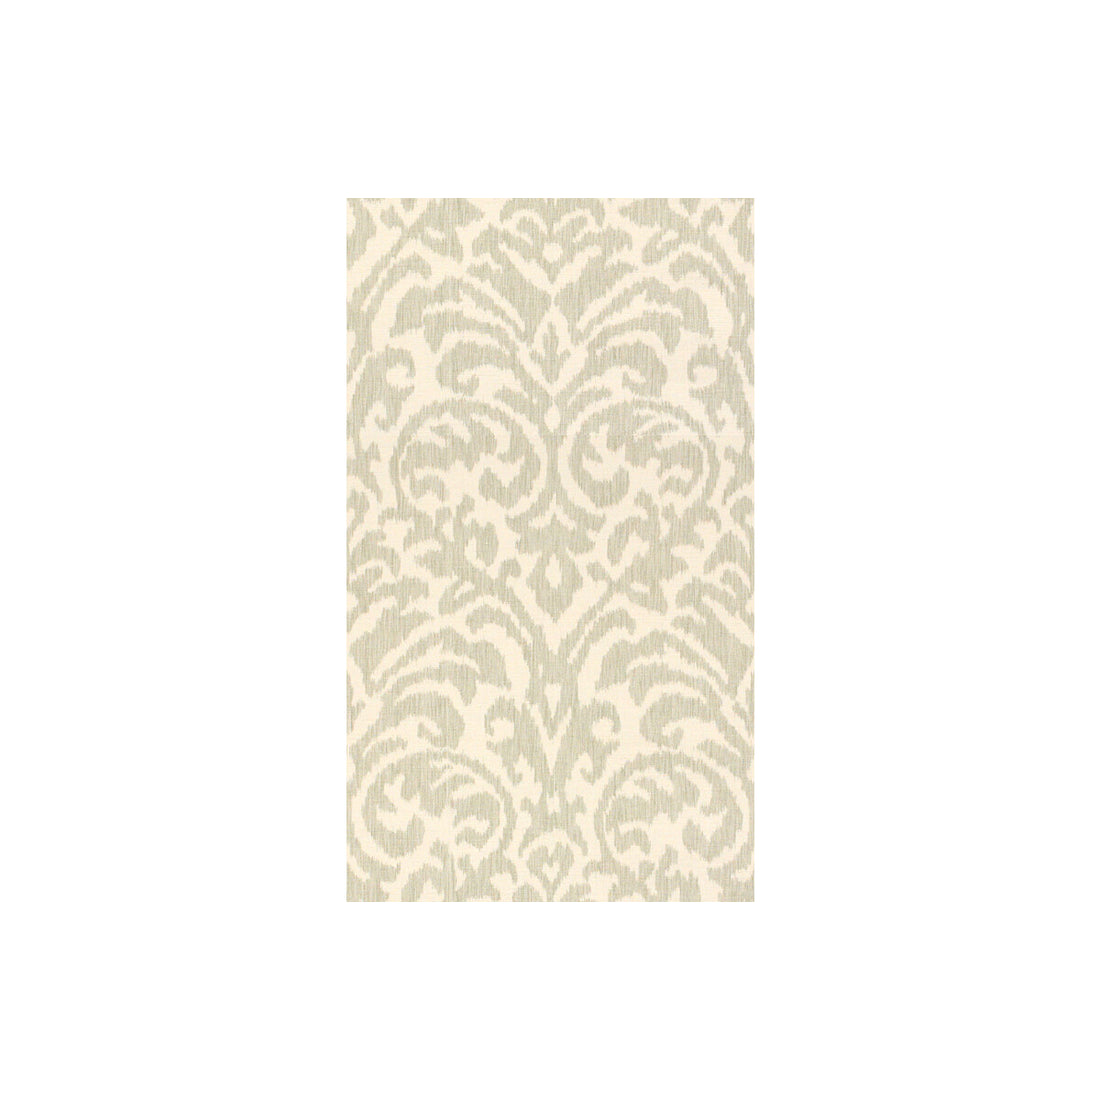 Ikat Damask fabric in mineral color - pattern 32051.15.0 - by Kravet Couture in the Modern Colors II collection